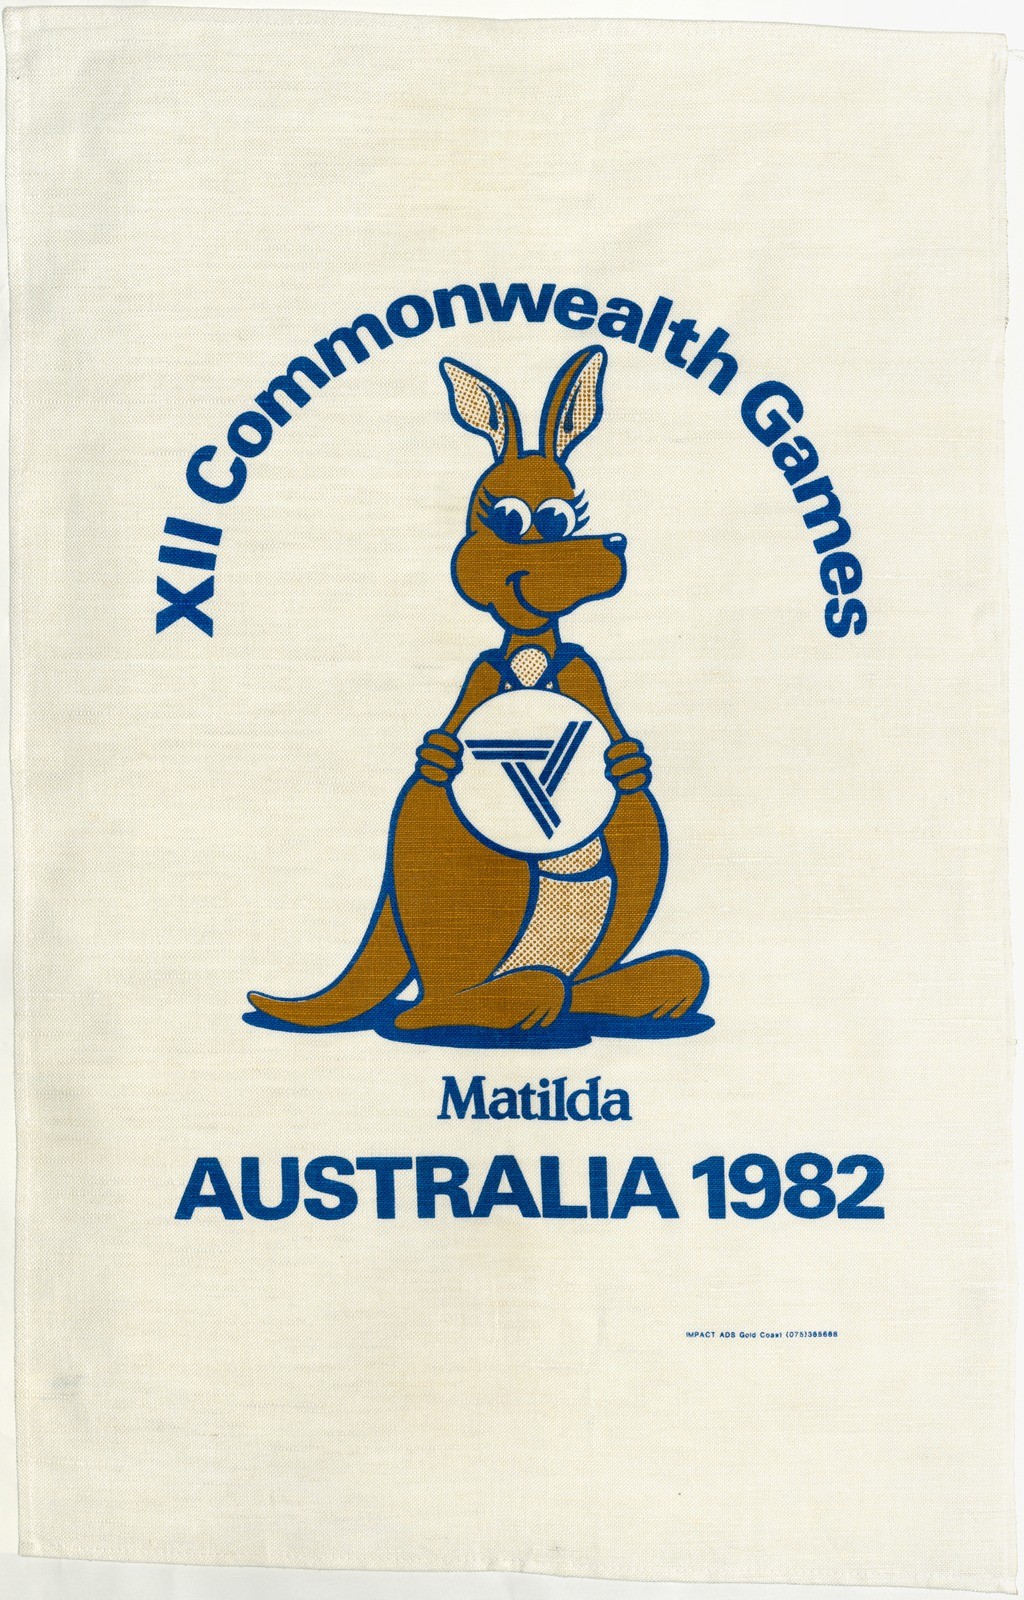 XII Commonwealth Games tea towel, c.1982. Made by Impact Ads.